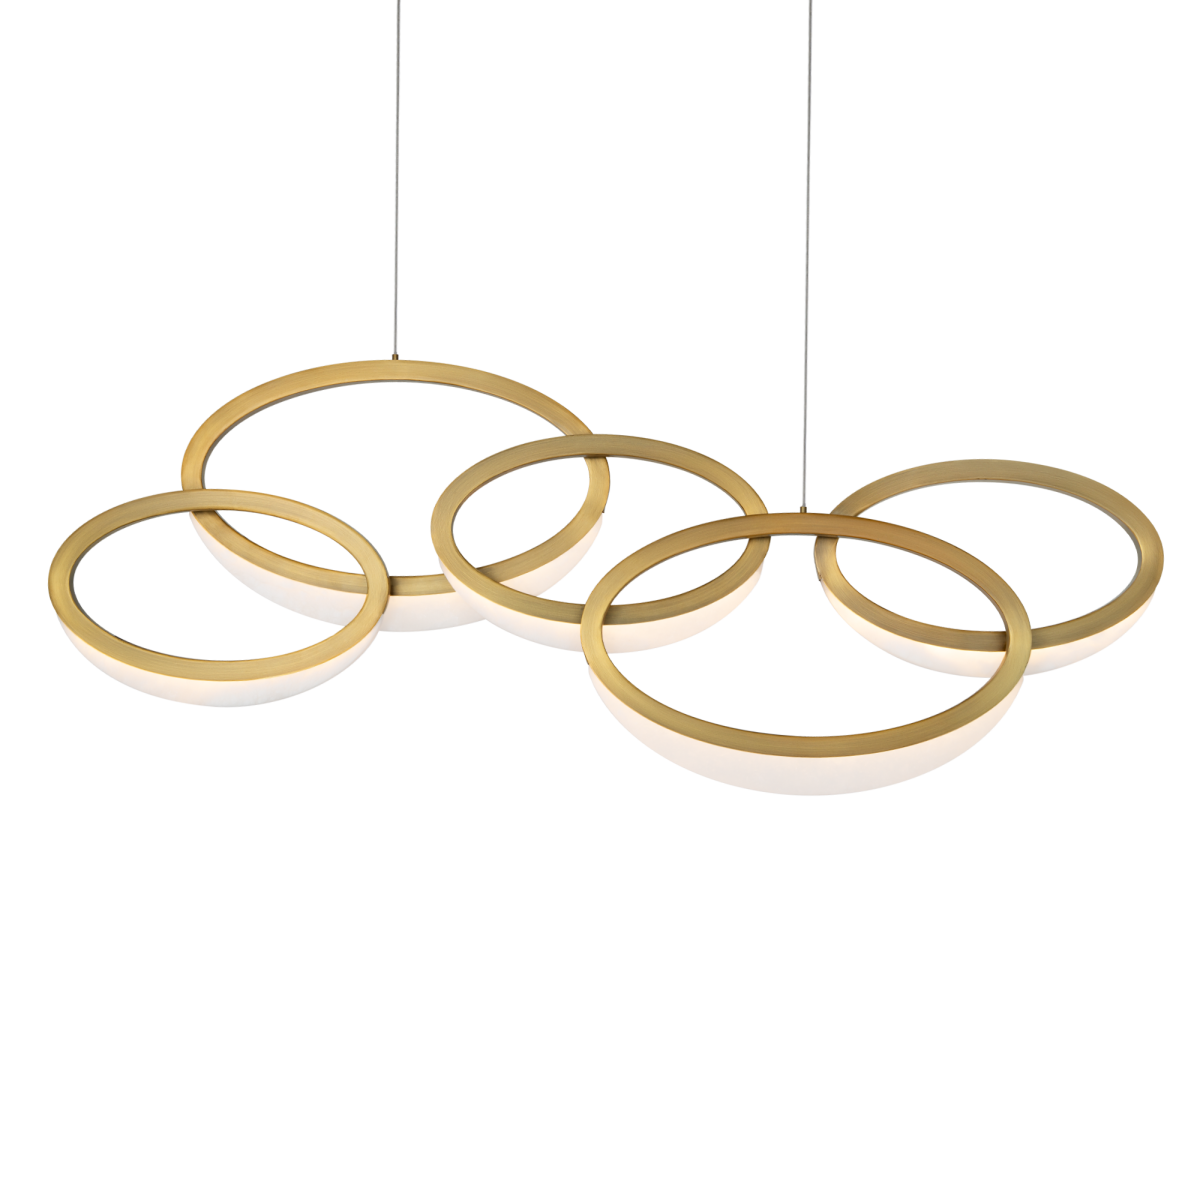 Modern Forms Orion Chandelier Light Chandeliers Modern Forms Aged Brass 45.5x3.875x18.125 